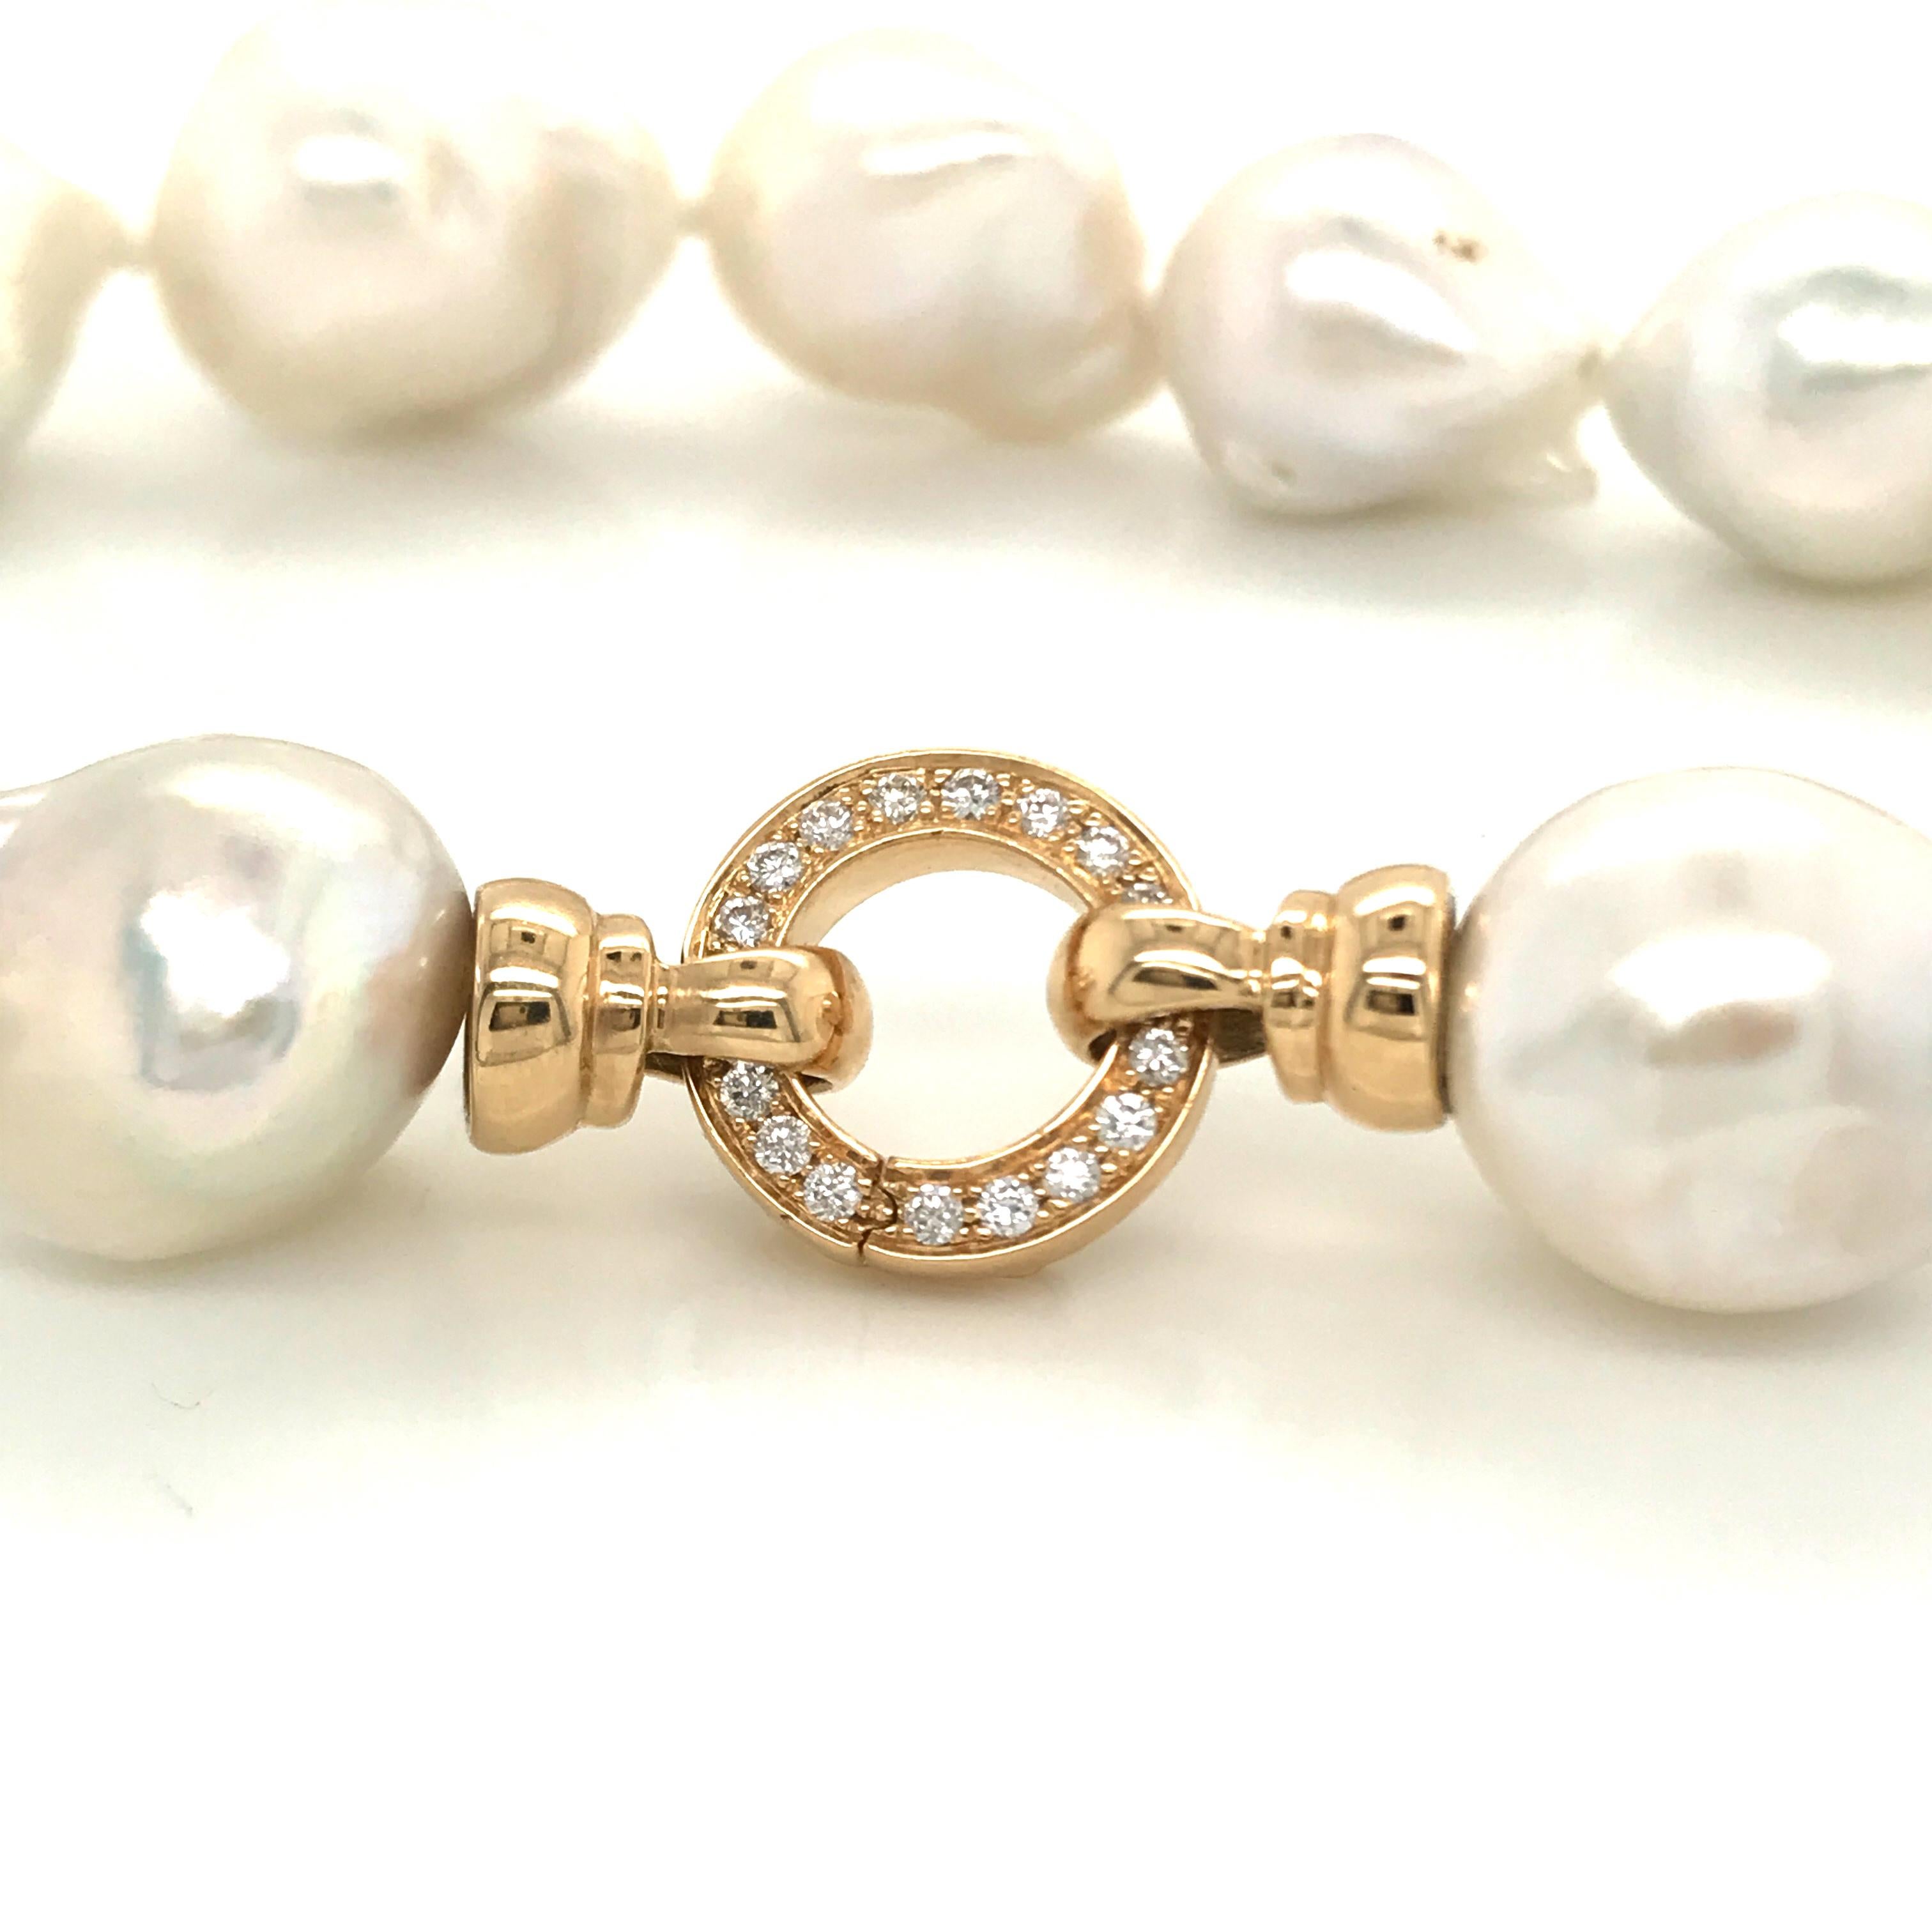 South Sea Baroque Pearl with Yellow gold and diamond Necklace
Baroque Pearl 15/16 mm 
Yellow Gold 18 k 
Bakelite Claps